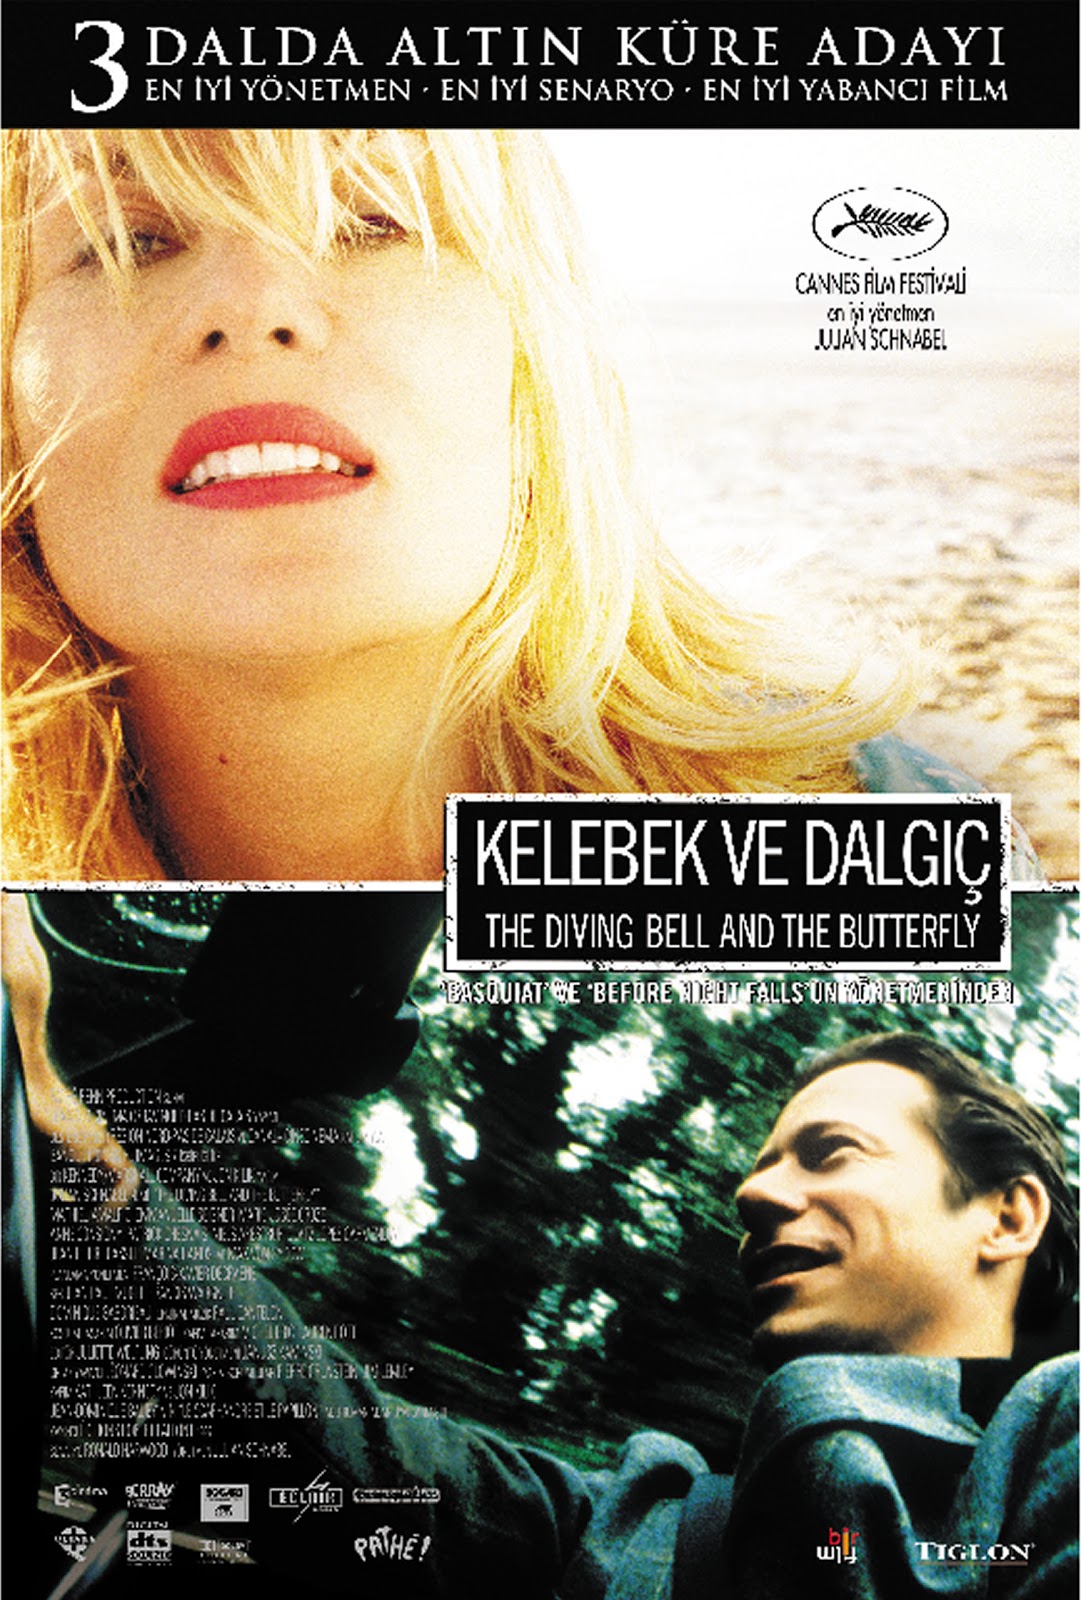 Neurology: locked-in syndrome in The Diving Bell and the Butterfly (2007)